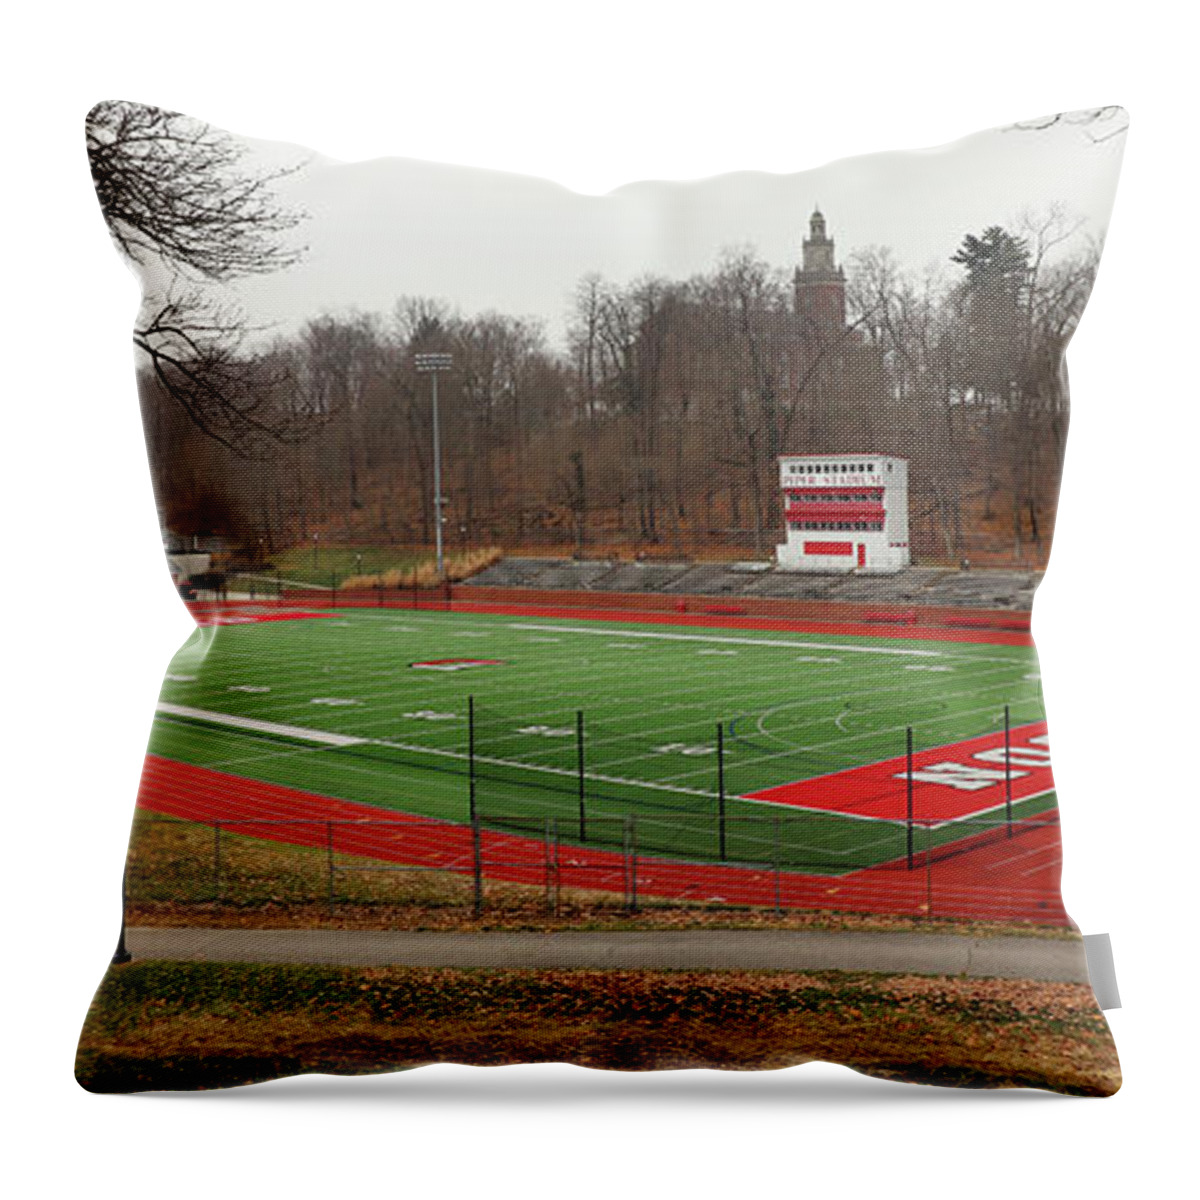 Piper Throw Pillow featuring the photograph Denison University Piper Stadium 5871 by Jack Schultz